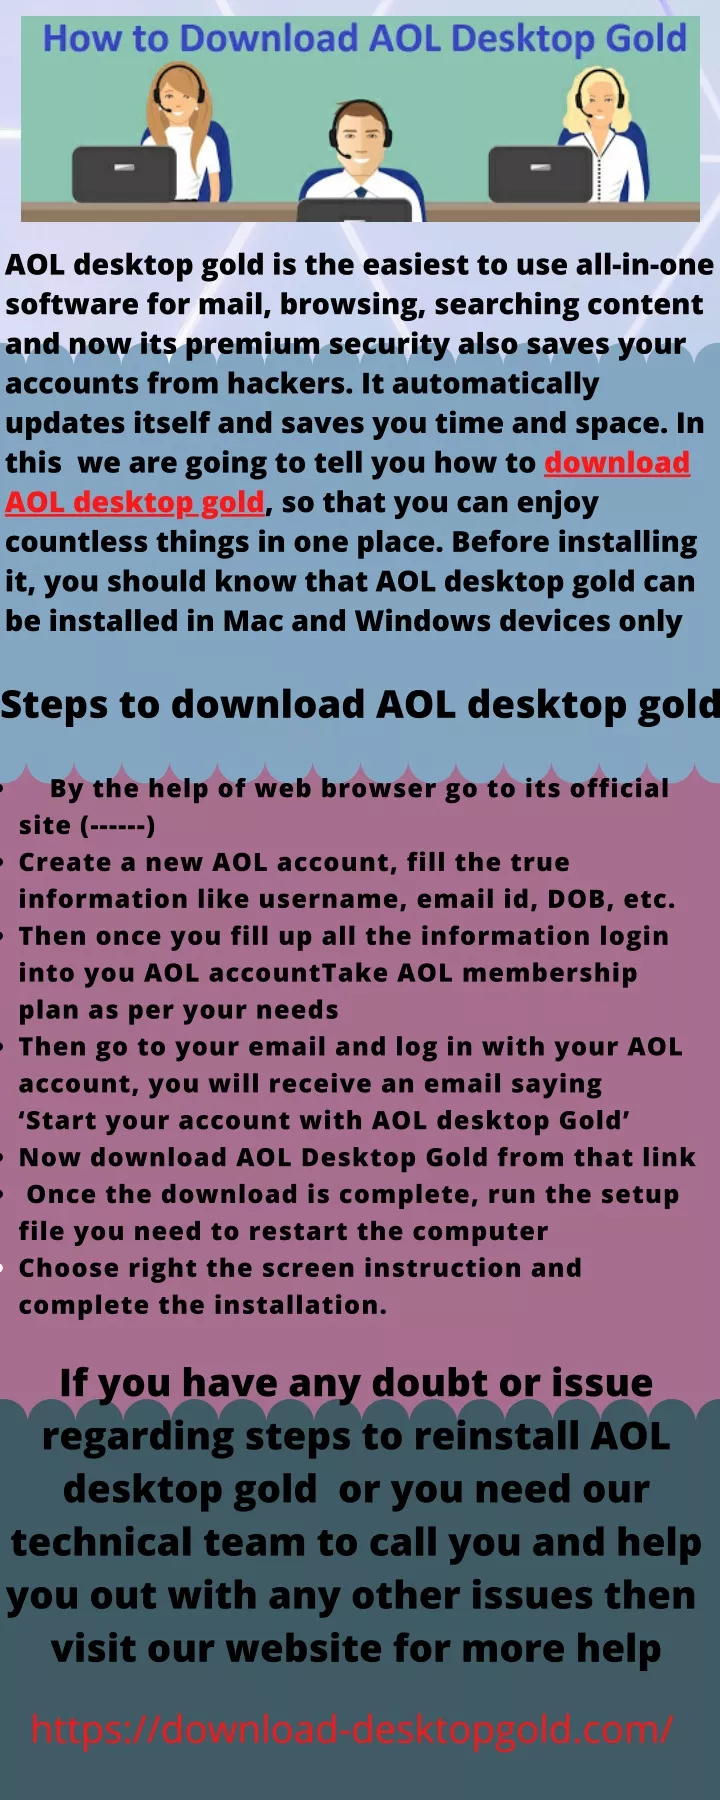 aol desktop gold is the easiest